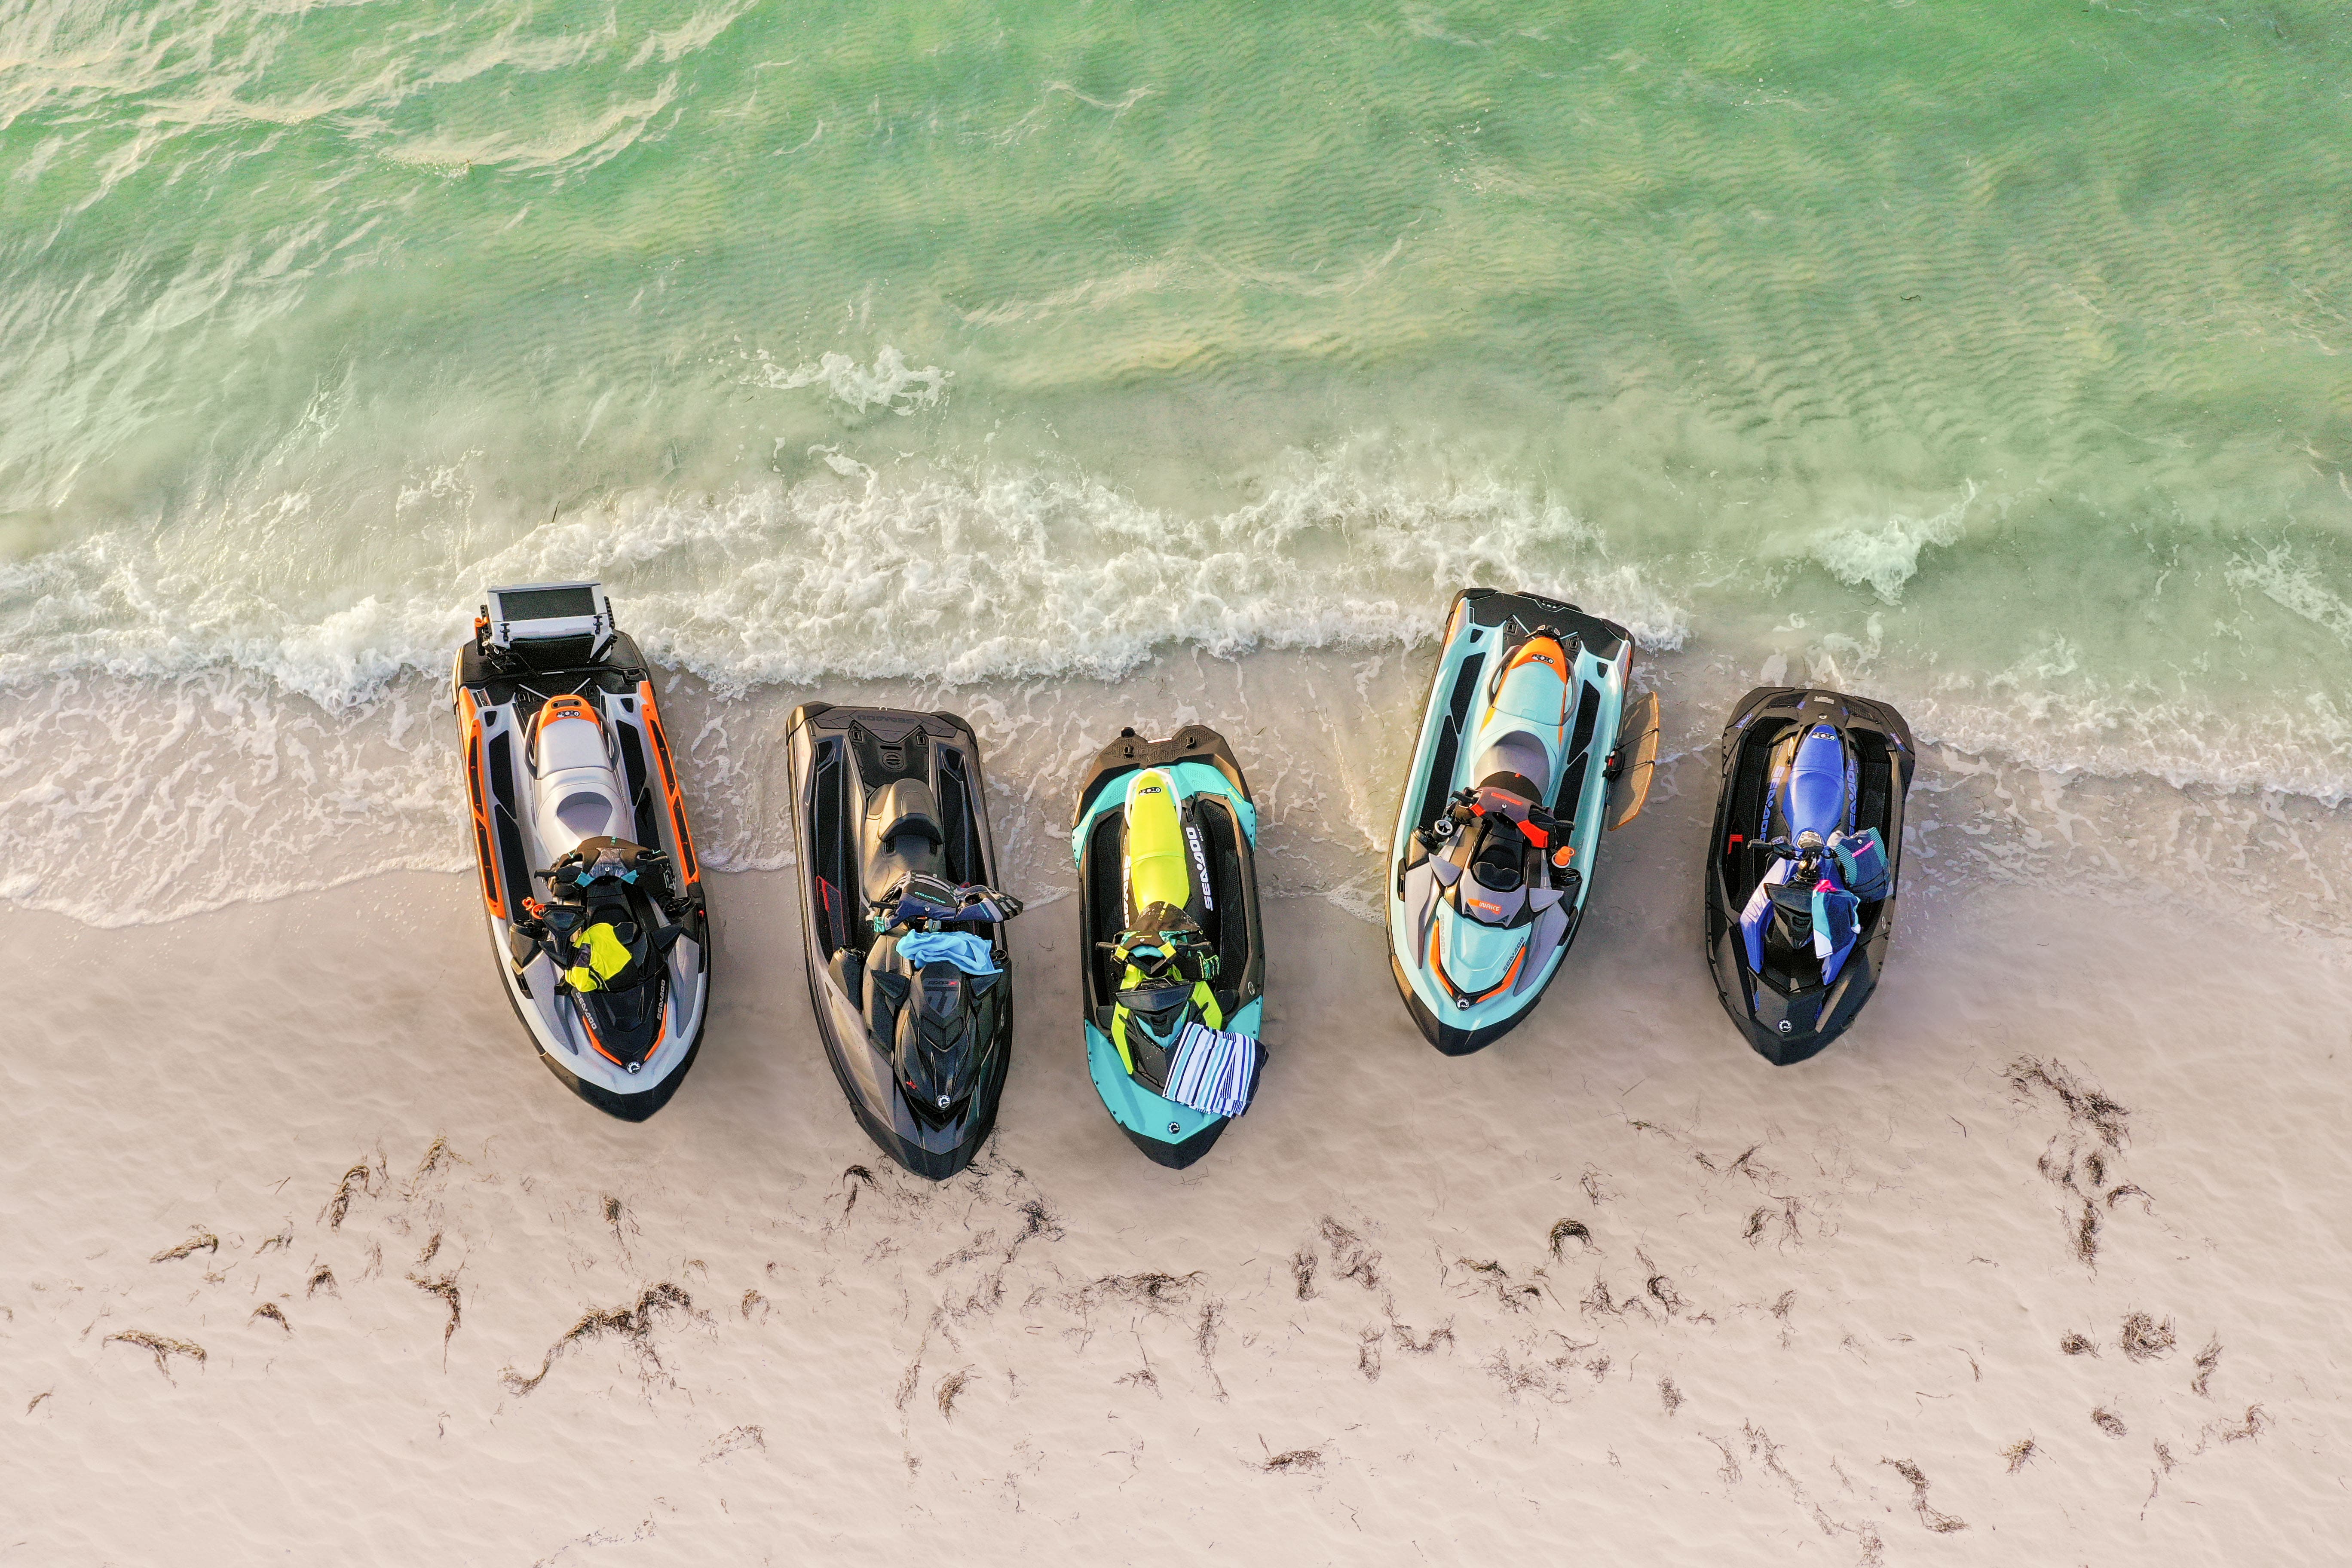 Your Guide to Grey Market vs. Authorised Sea-Doo Units